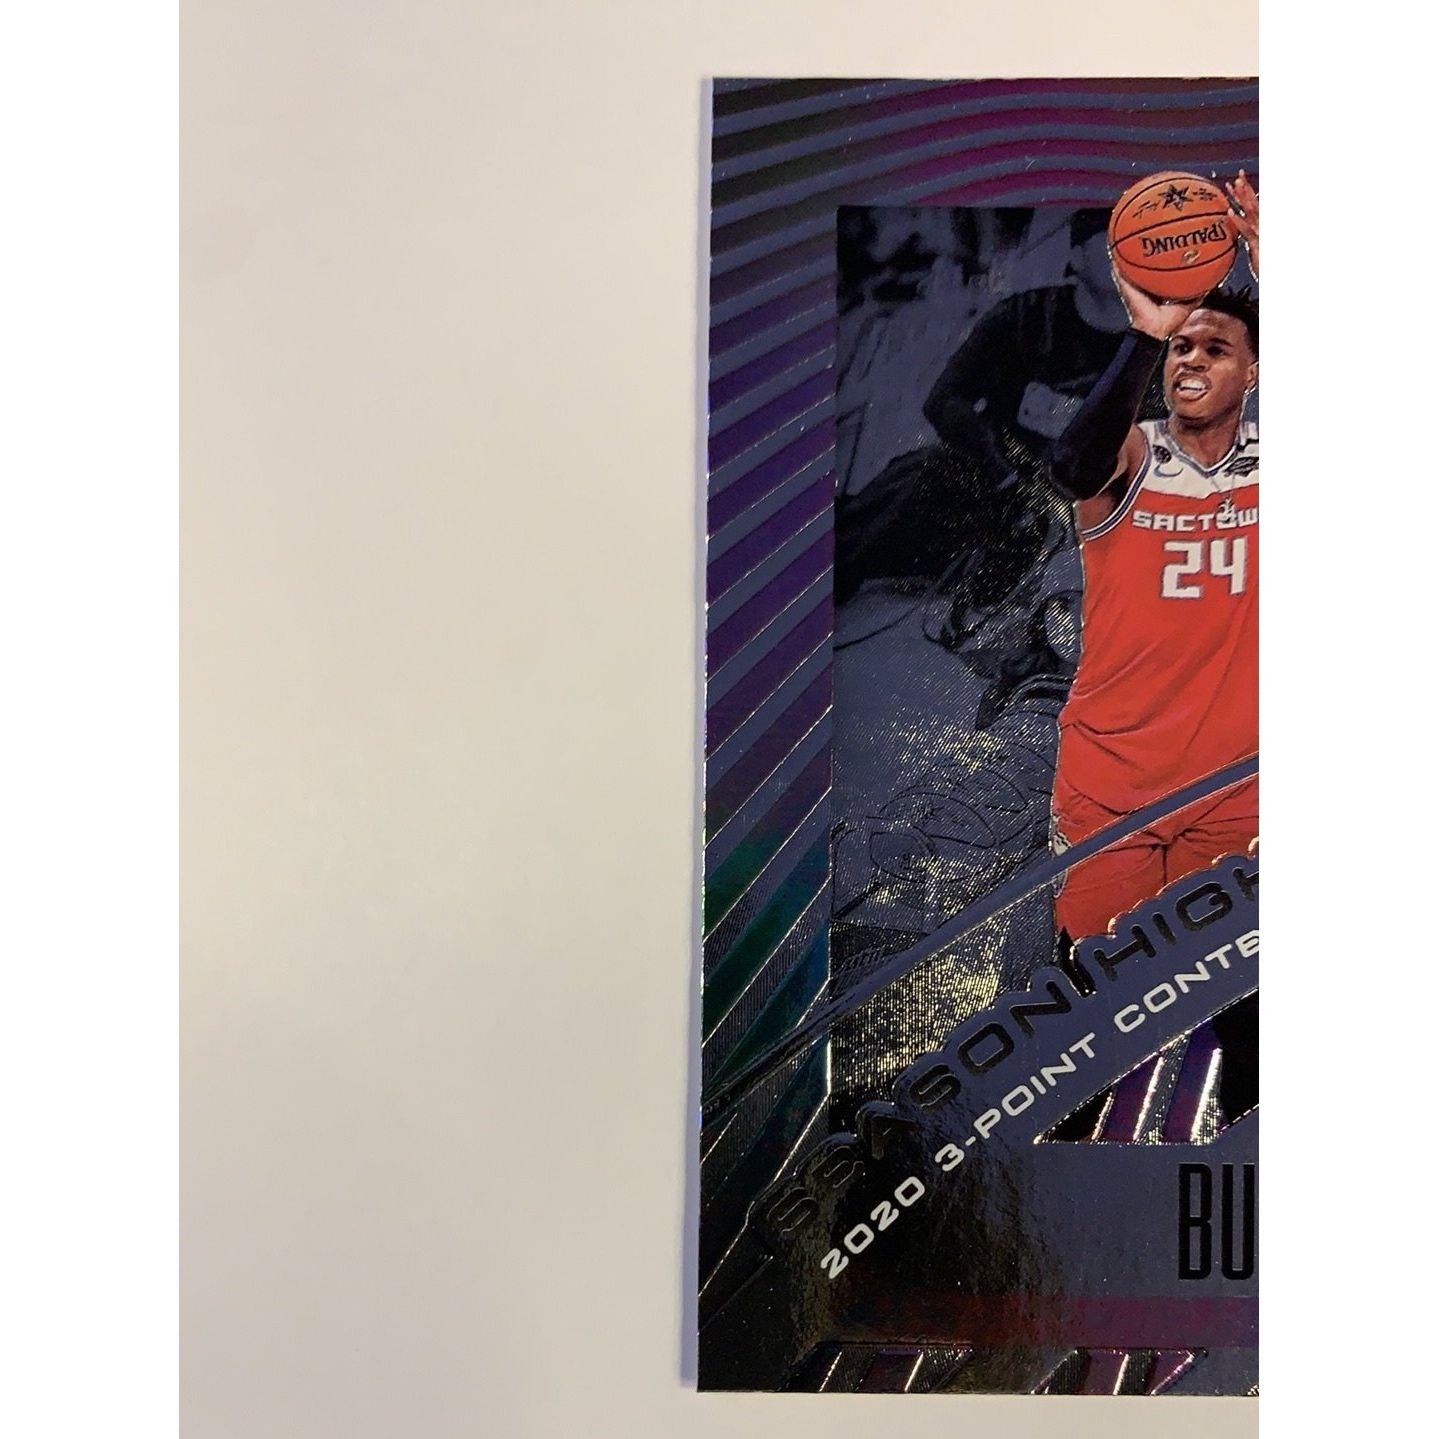  2019-20 Illusions Season Highlights Buddy Hield  Local Legends Cards & Collectibles